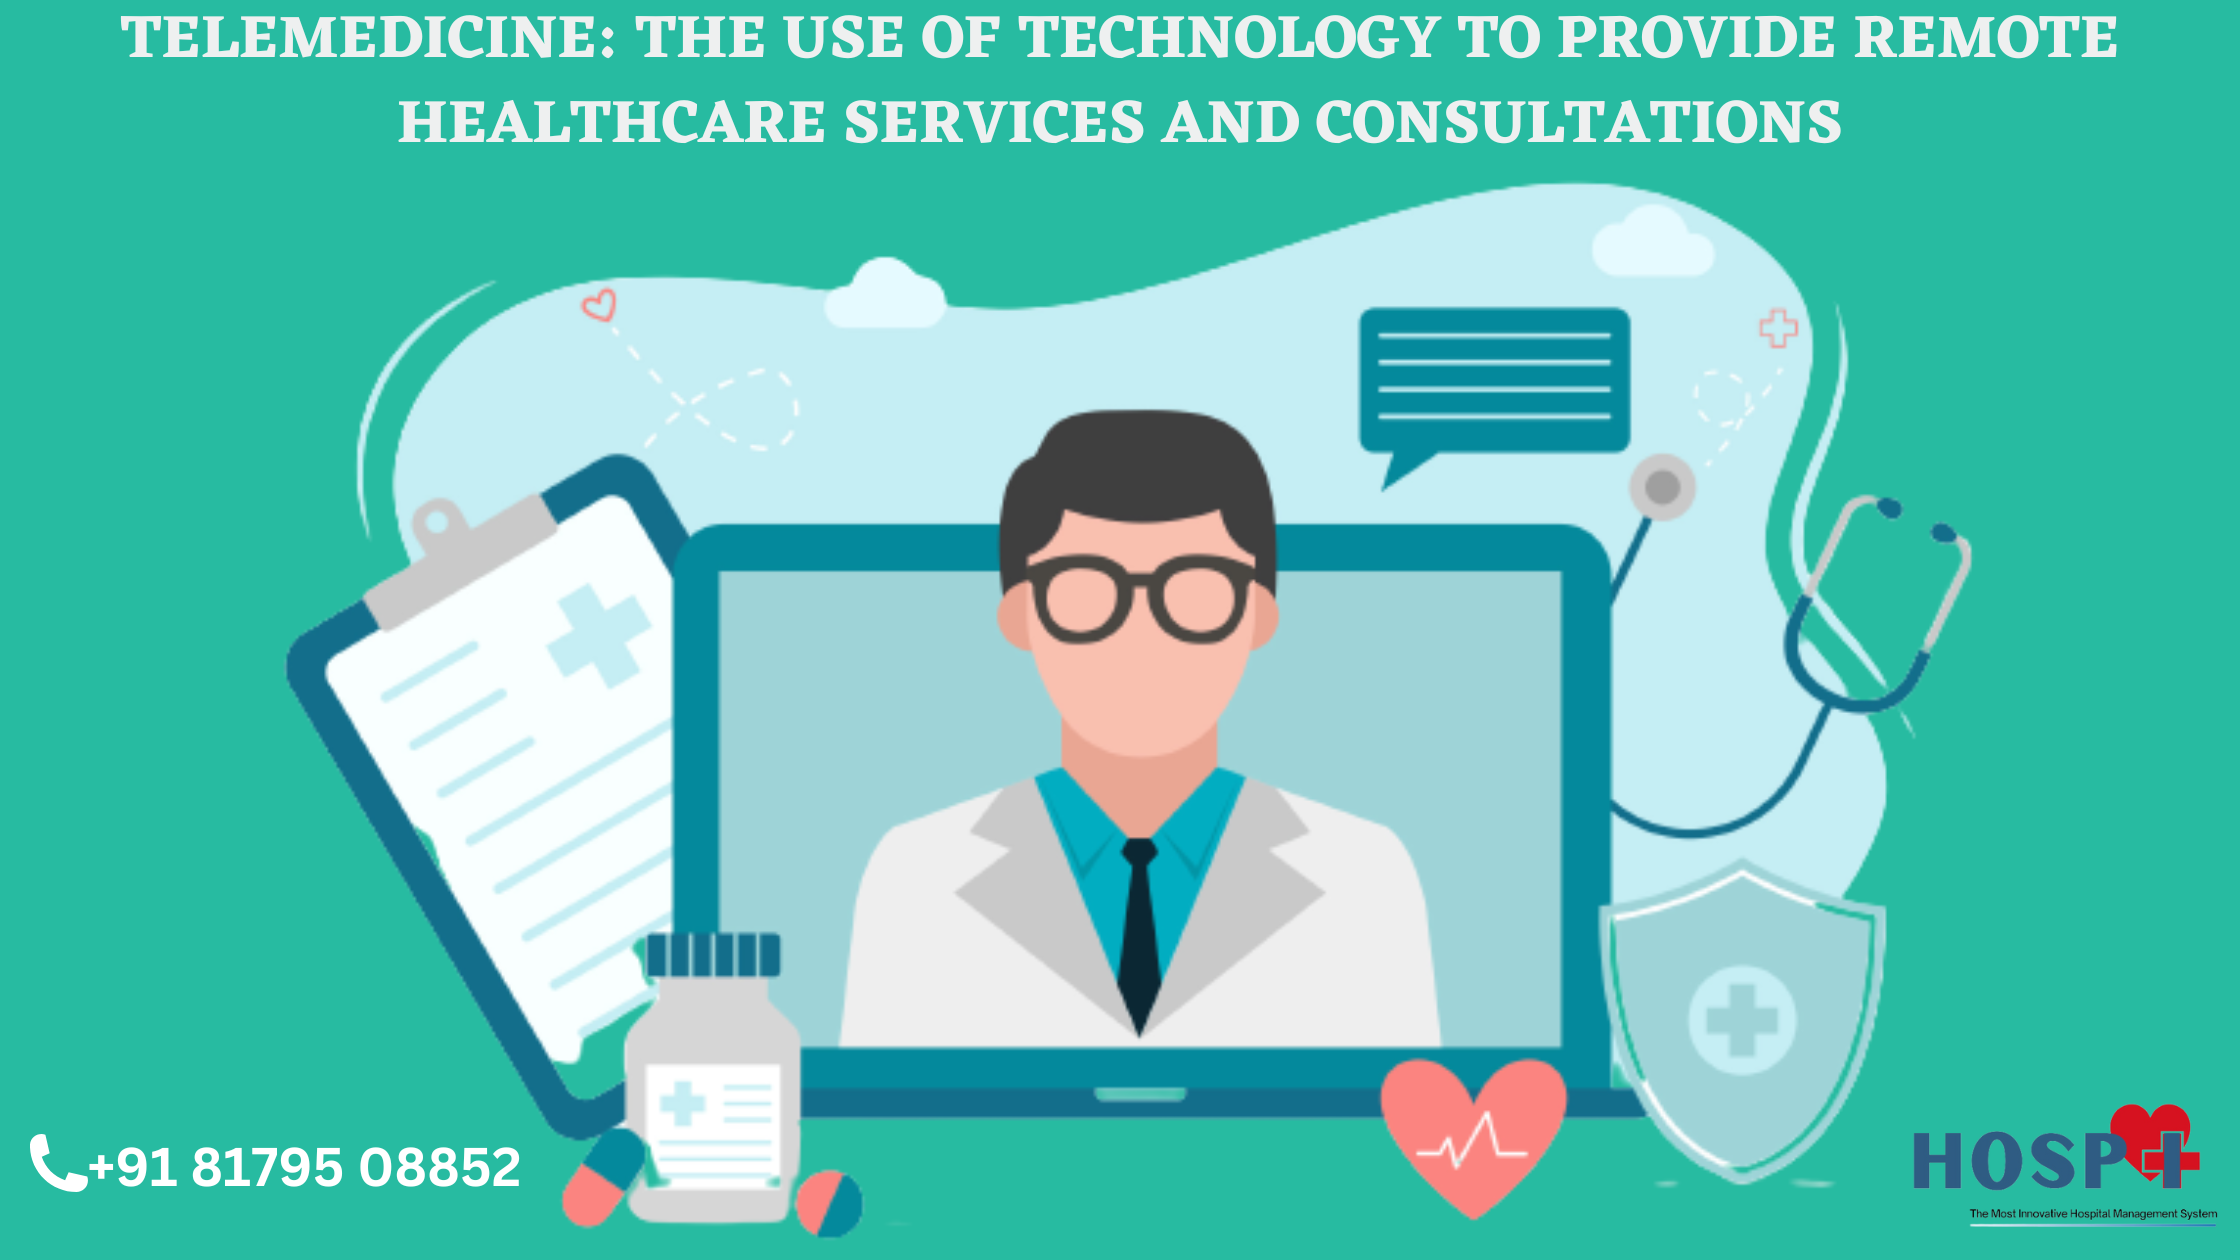 Telemedicine: The use of technology to provide remote healthcare services and consultations